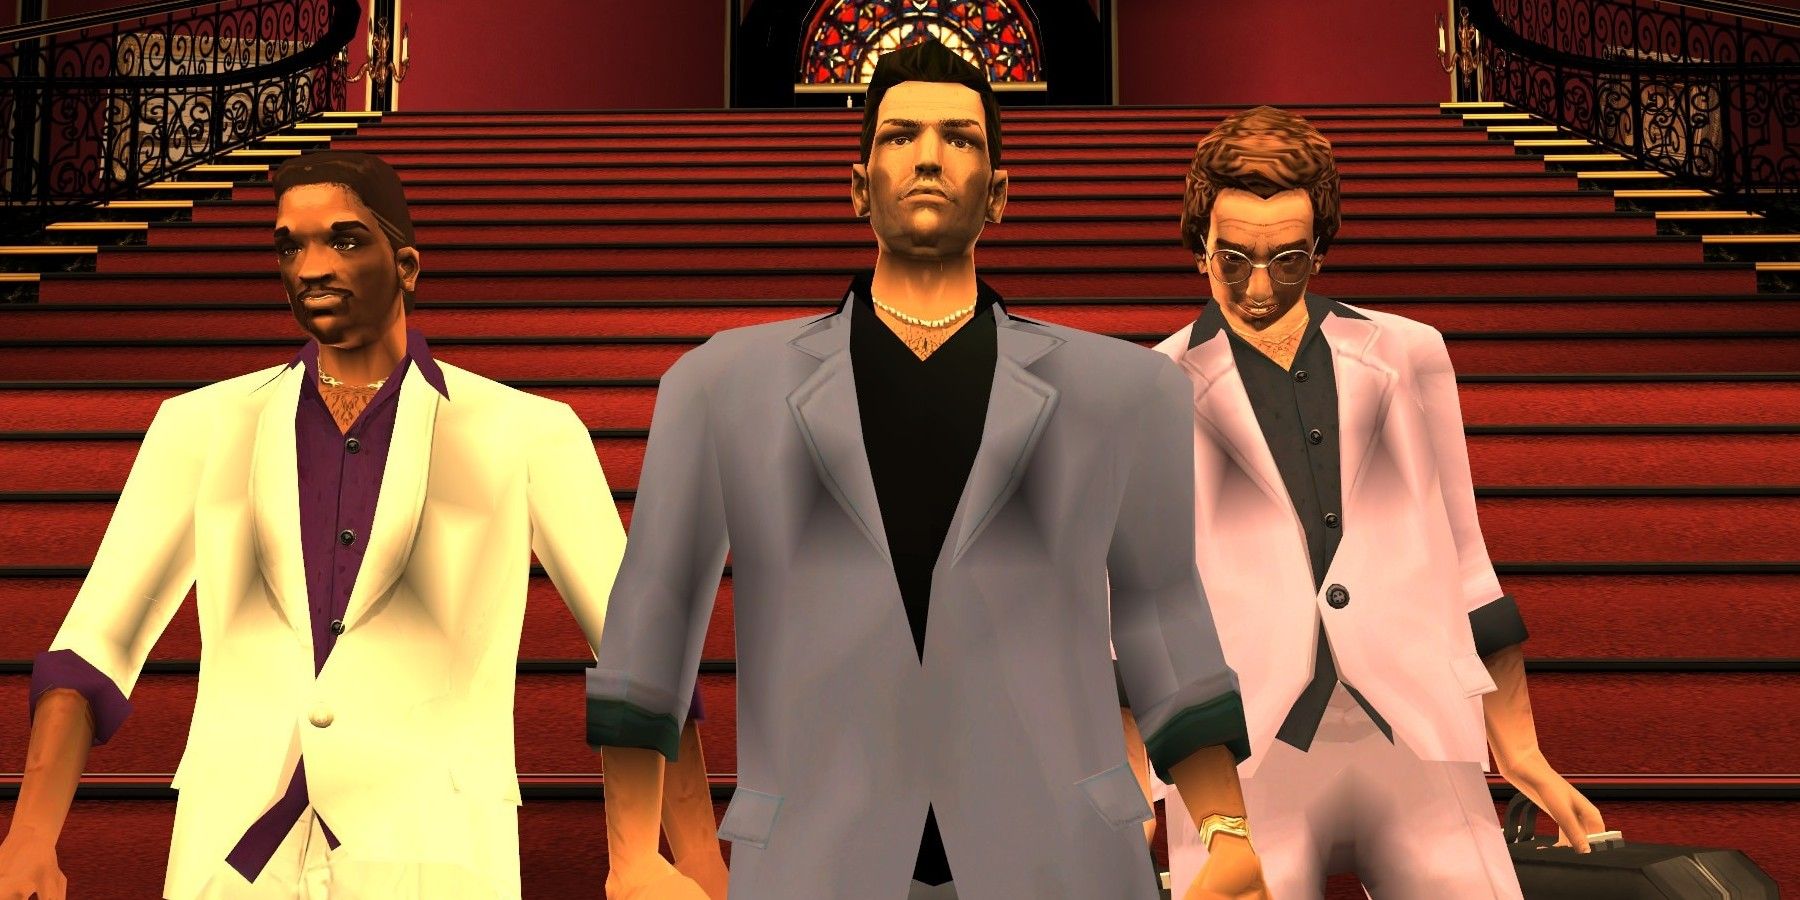 Vice City's anniversary could lead to GTA 6's reveal.